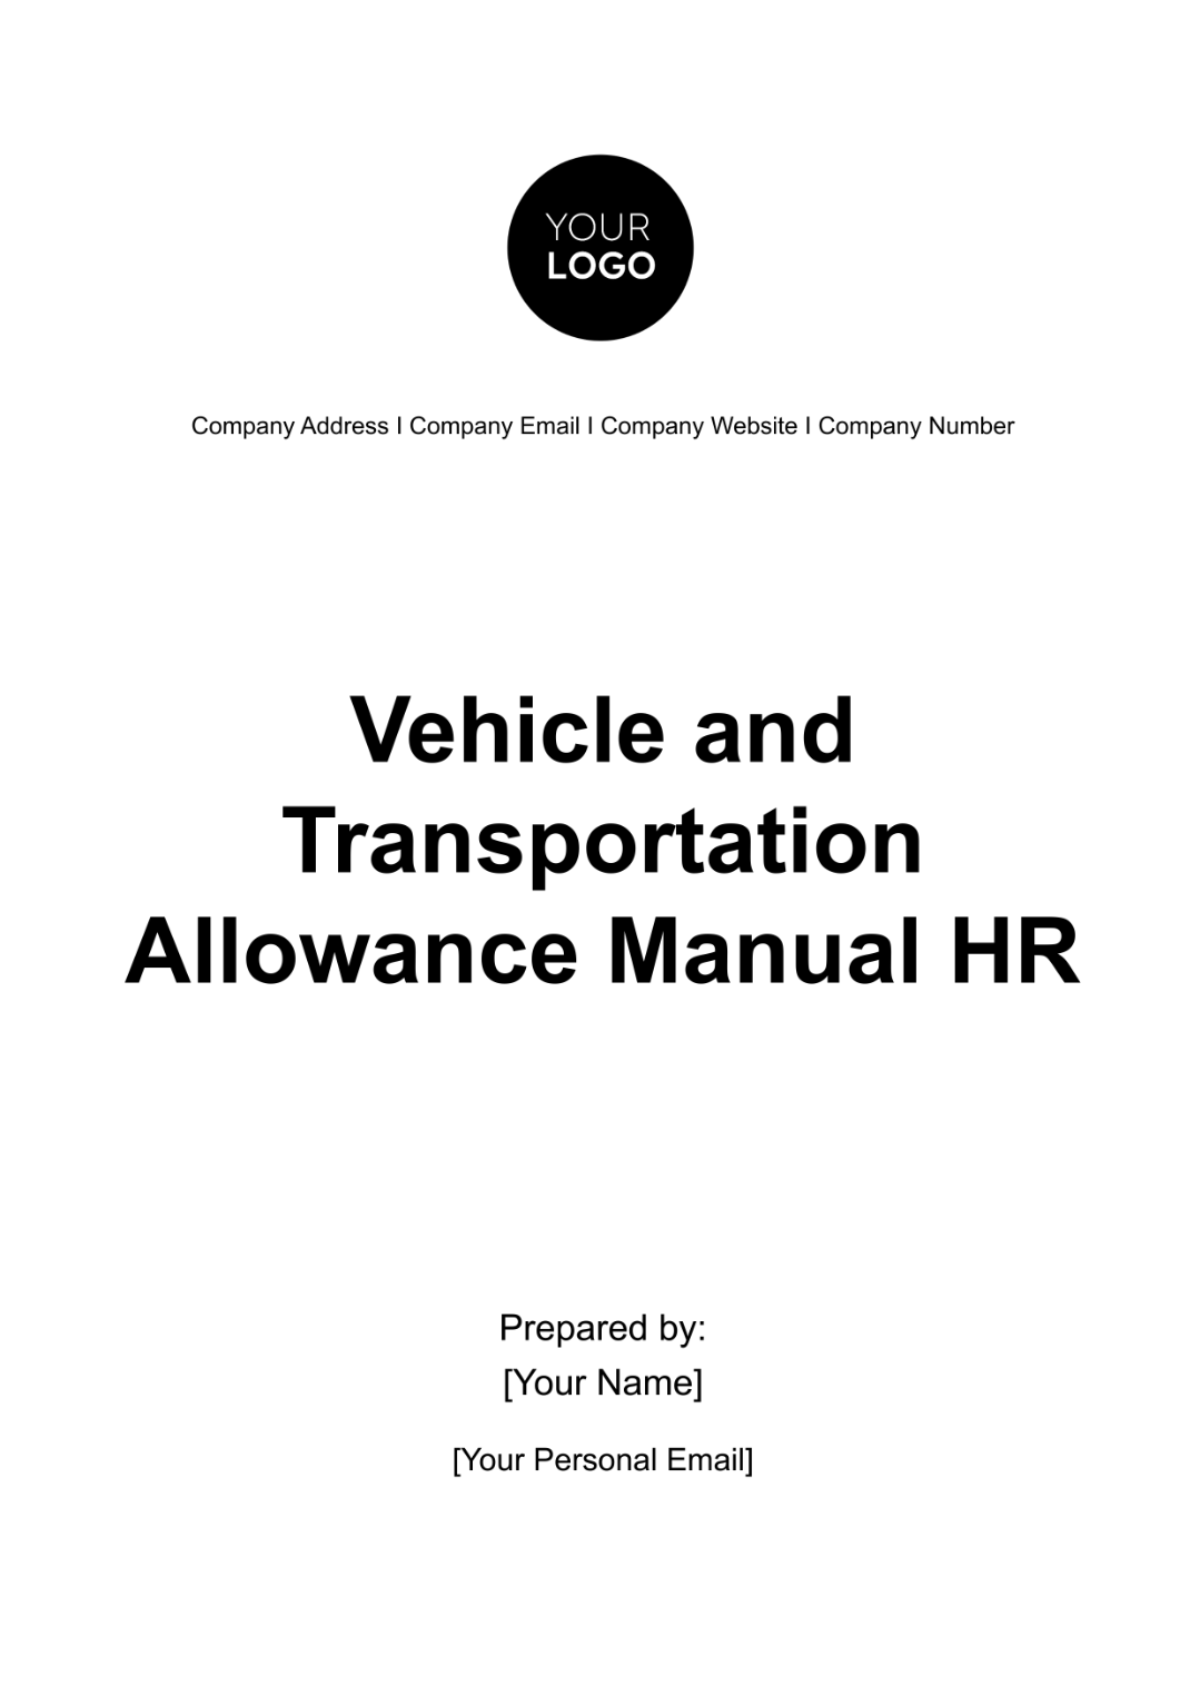 Vehicle and Transportation Allowance Manual HR Template